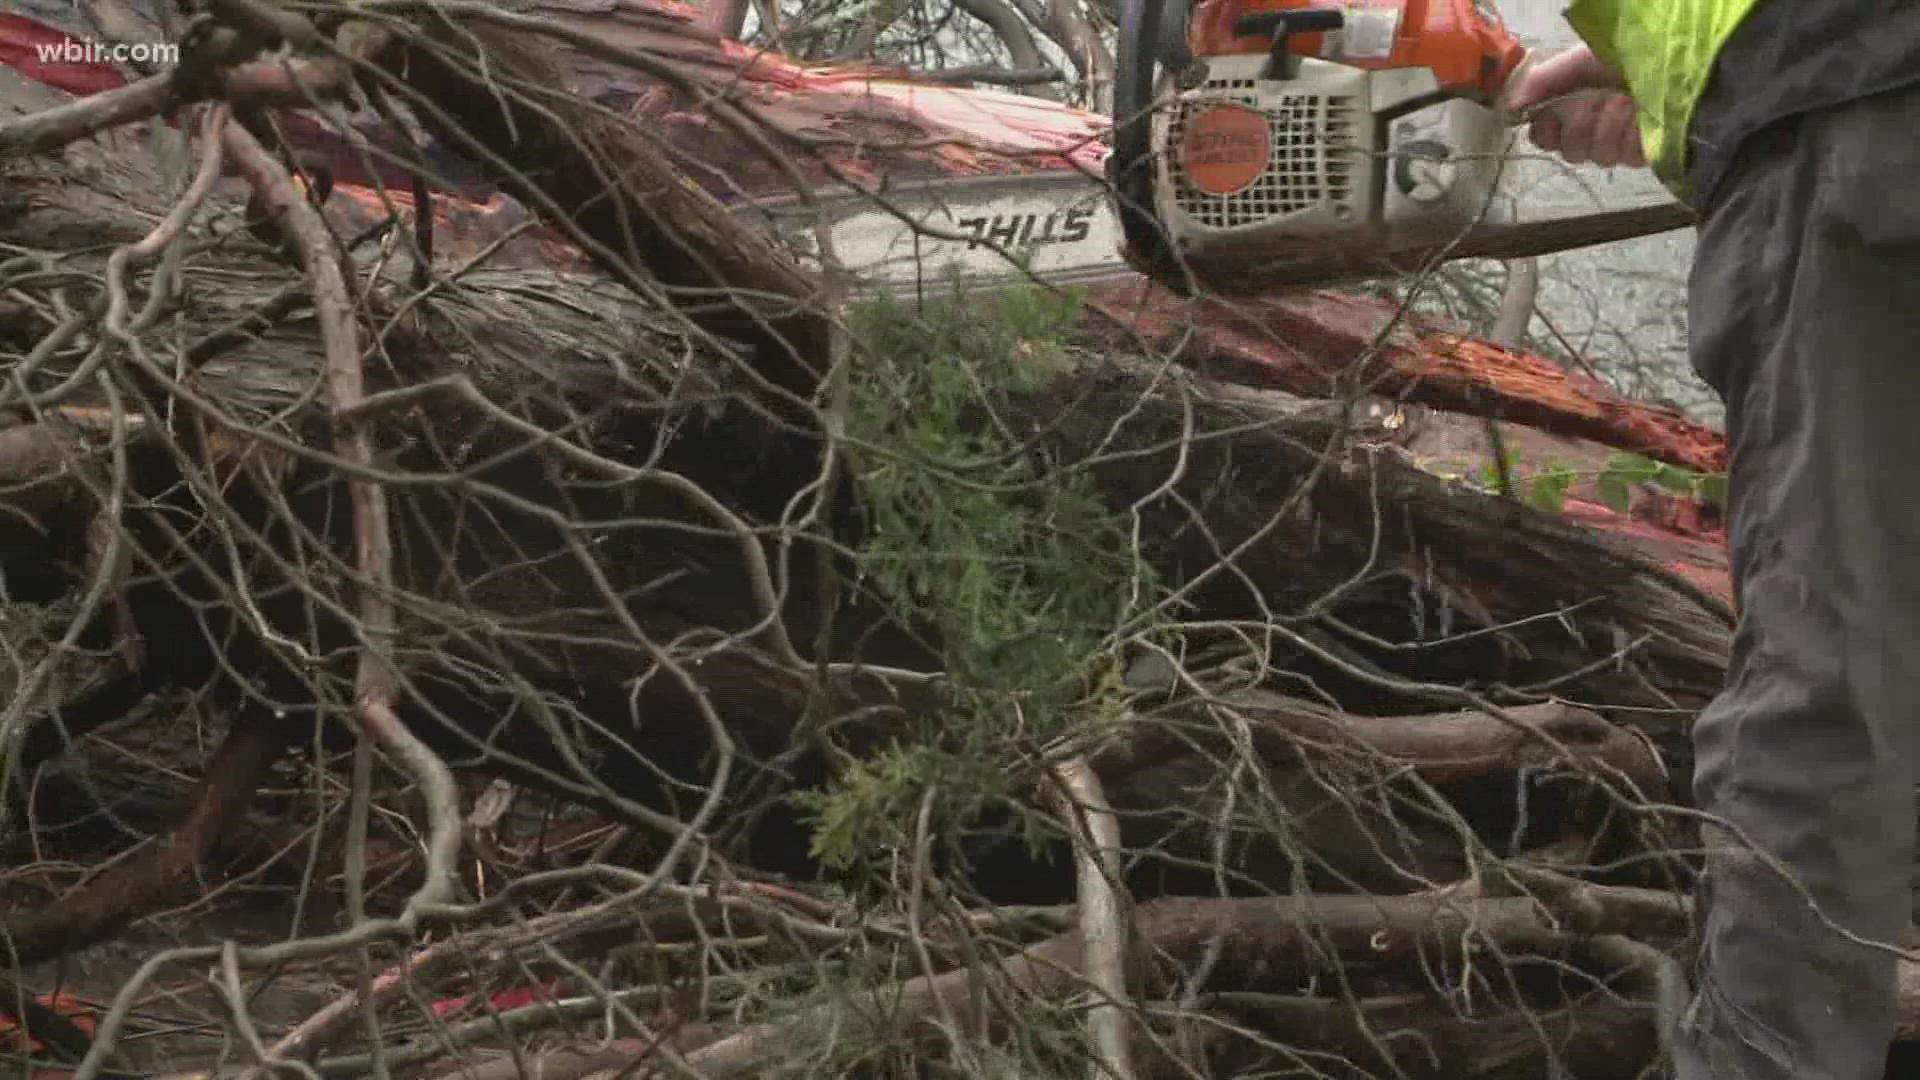 Storms passed through East Tennessee on Saturday, damaging some areas and knocking out power.